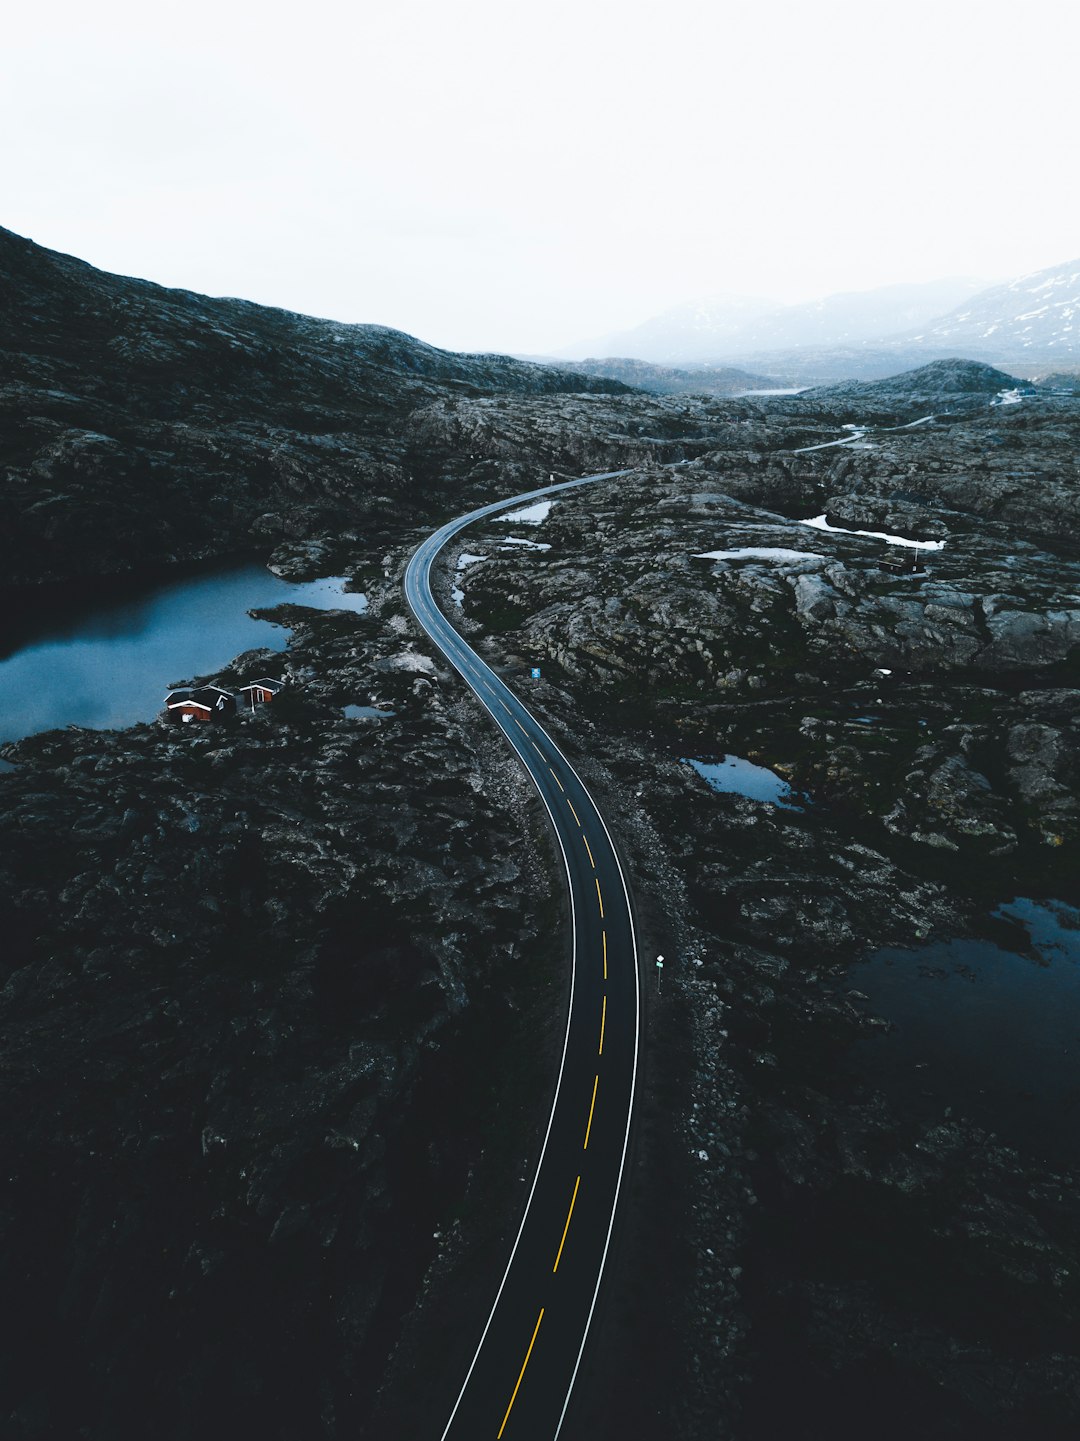 travelers stories about Road trip in E10 1, Norway